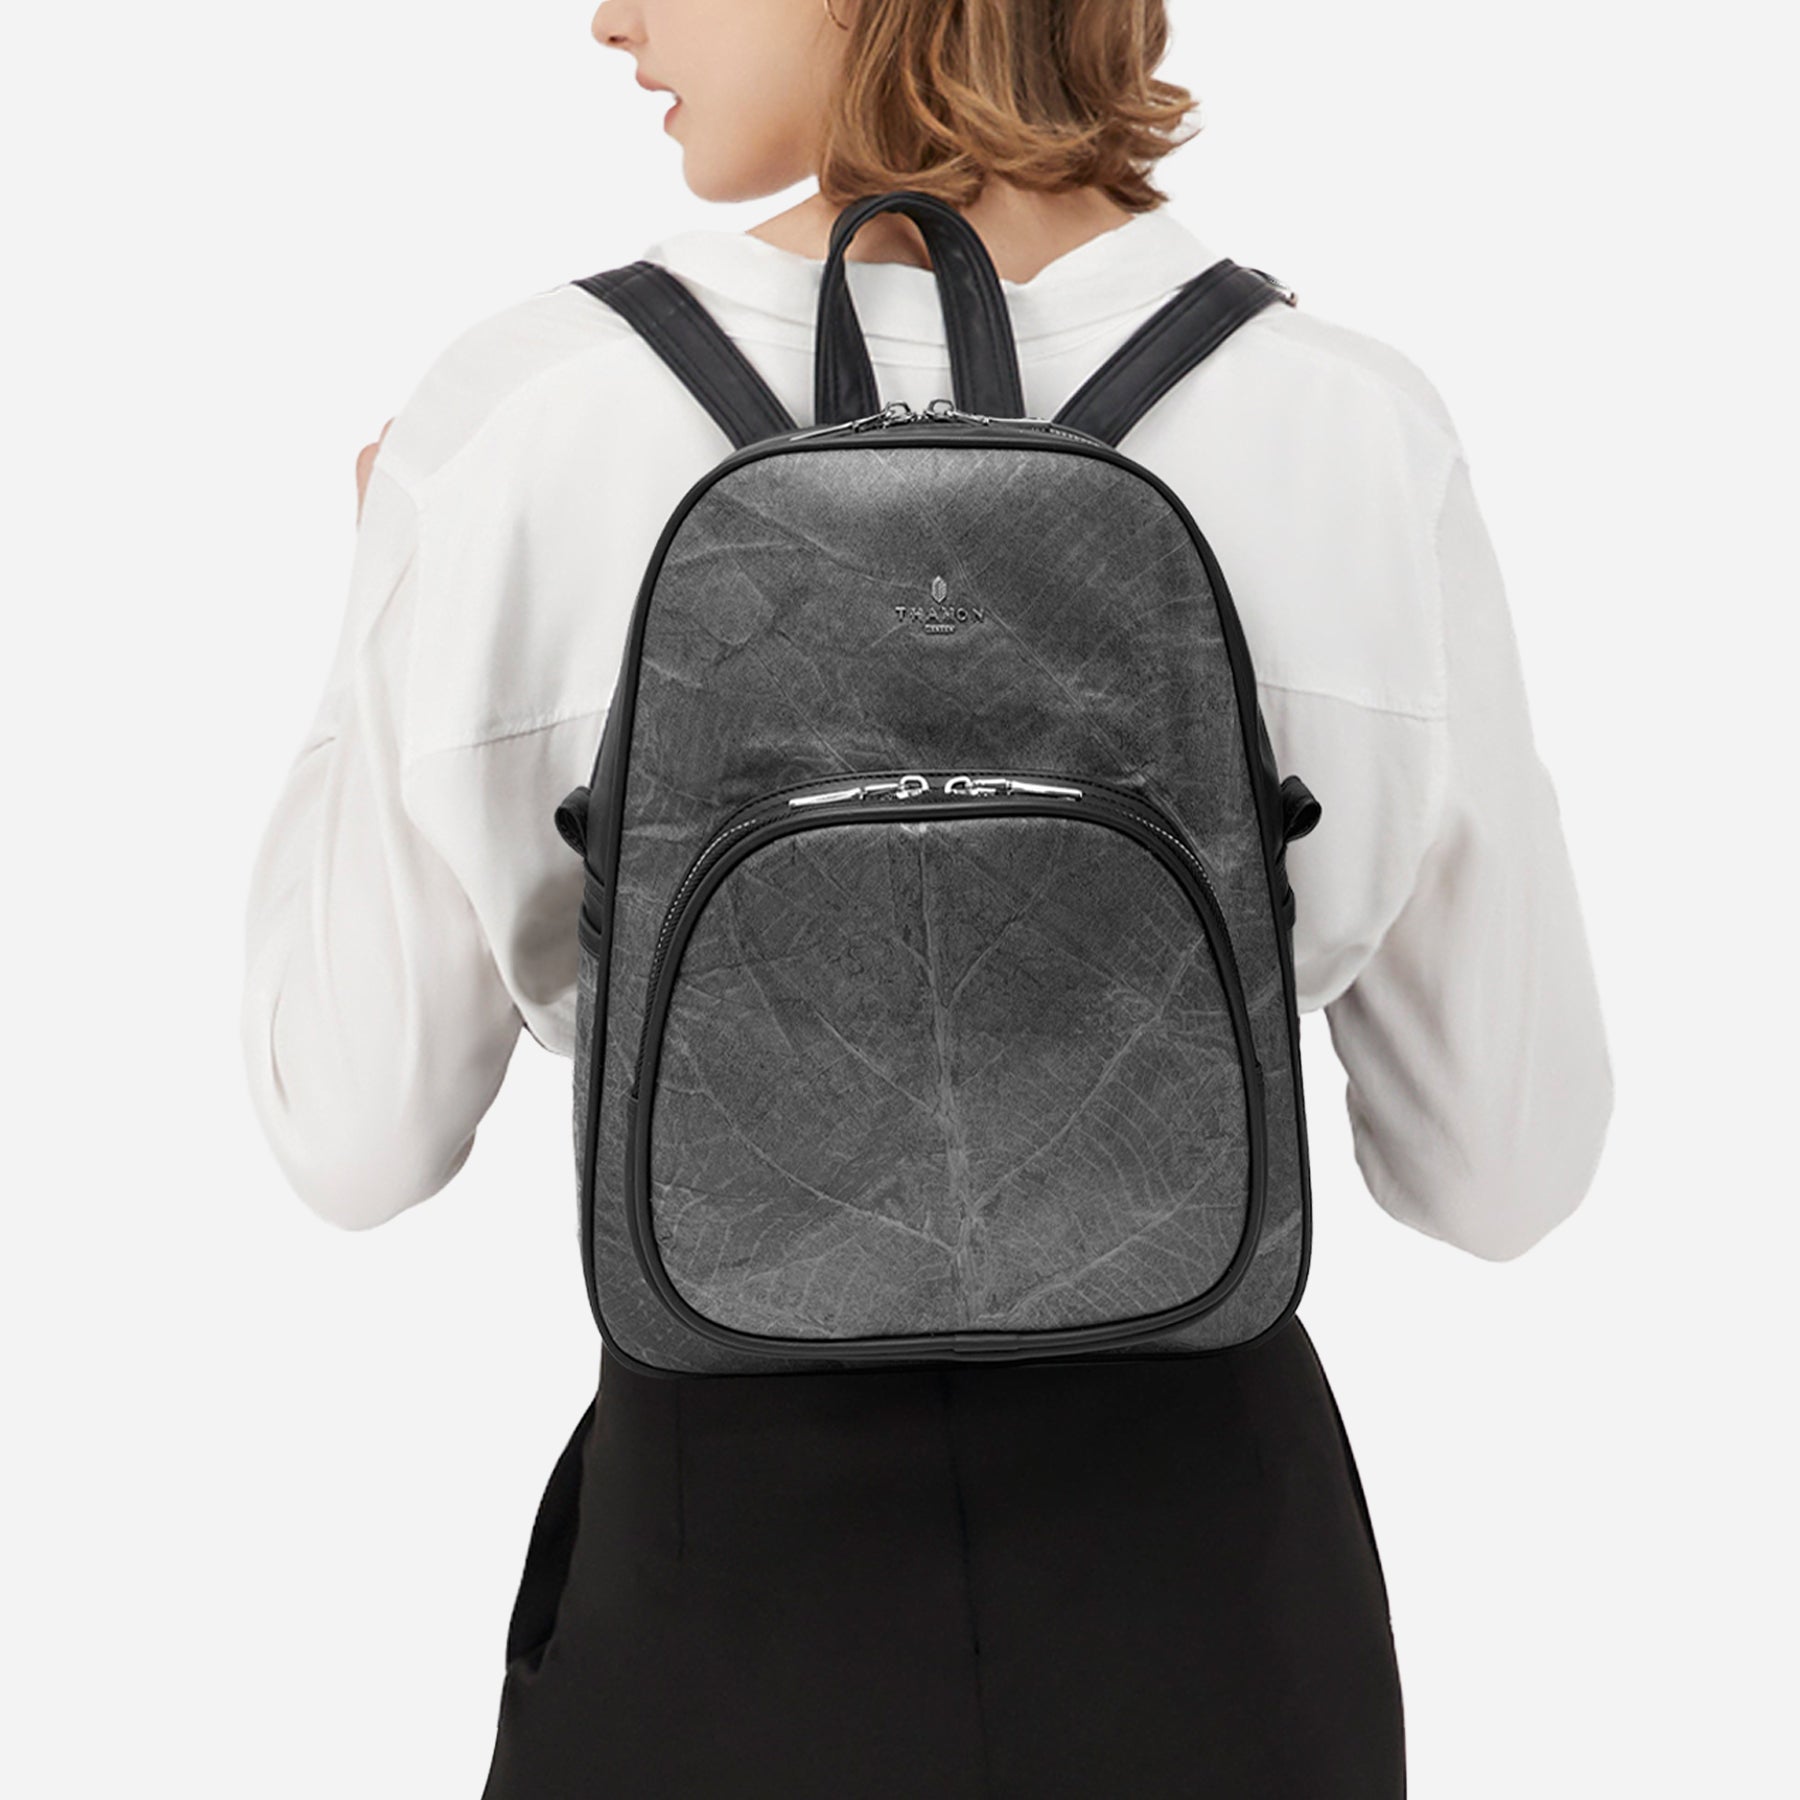 Mother's Day Gift Guide: The Top Vegan Backpacks For Travelers